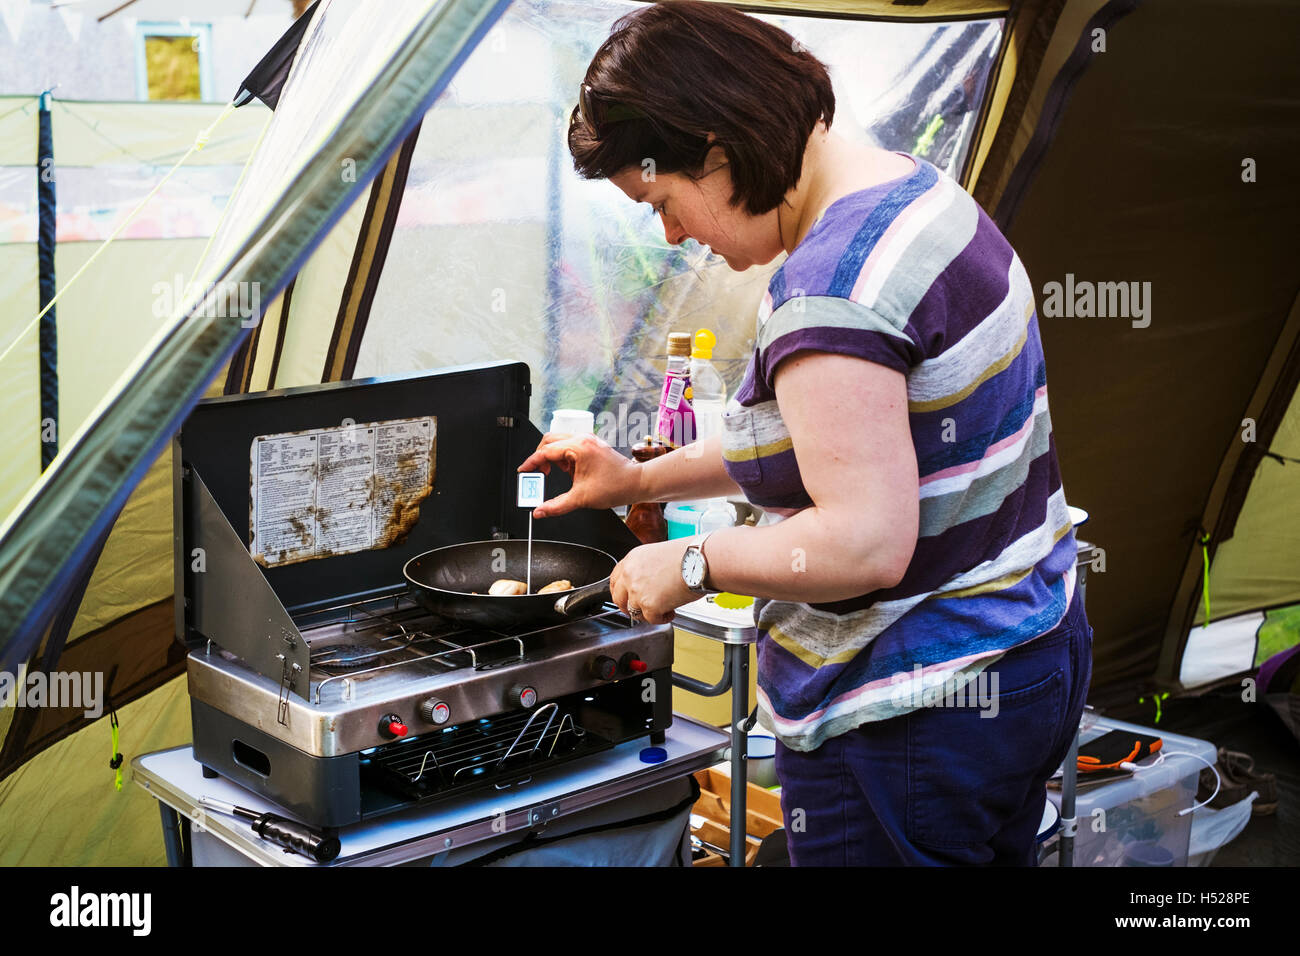 Woman at a camping stove, measuring the temperature of a scallop in a frying pan with a digital thermometer. Stock Photo